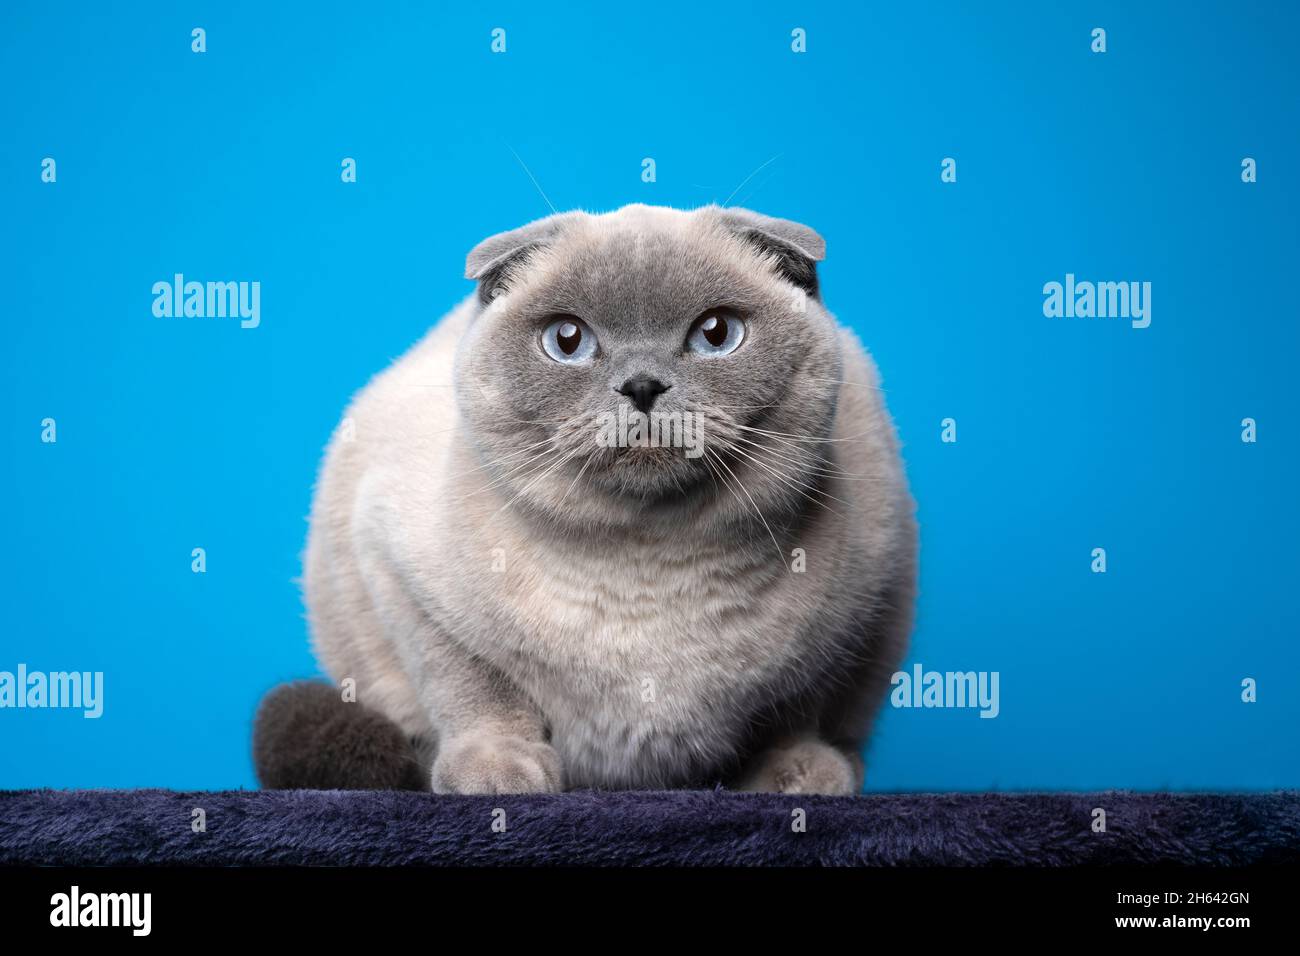 blue point scottish fold cat portrait looking at camera on blue background with copy space Stock Photo